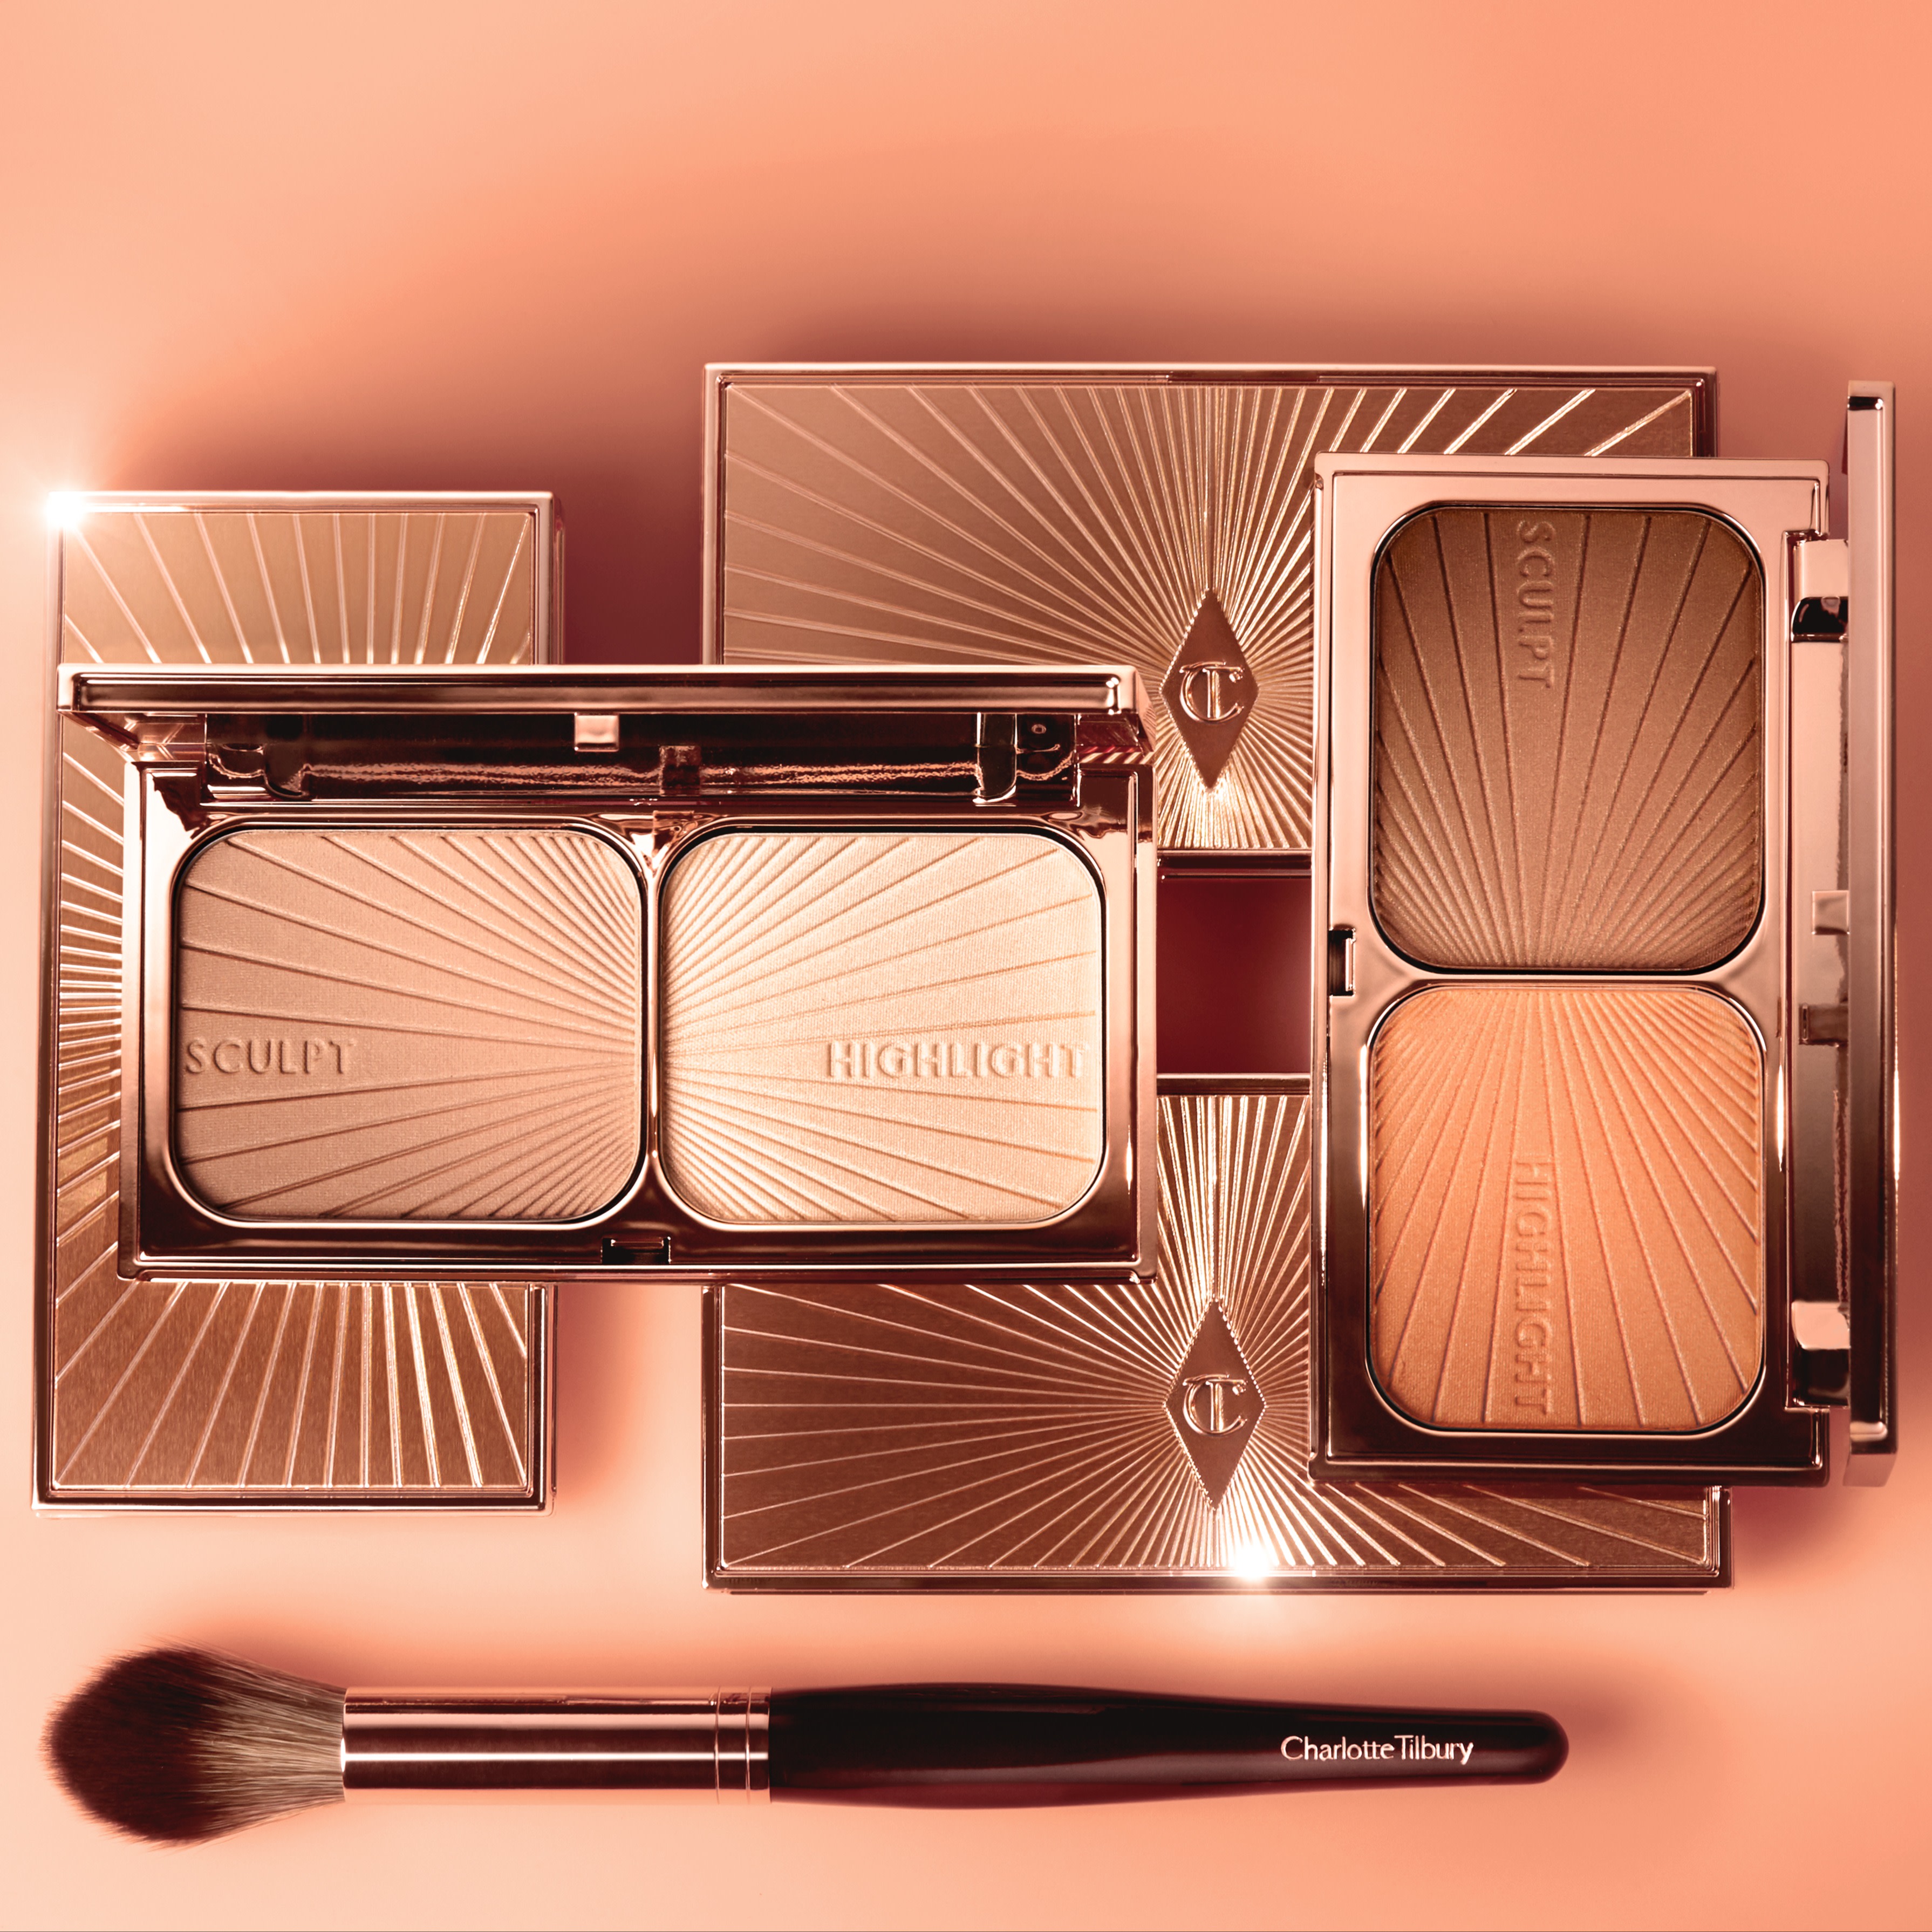 A collection duo contouring palette with a bronzer and highlighter powder for fair to medium skin tones and medium to dark skin tones in a sleek, gold-coloured compact. 